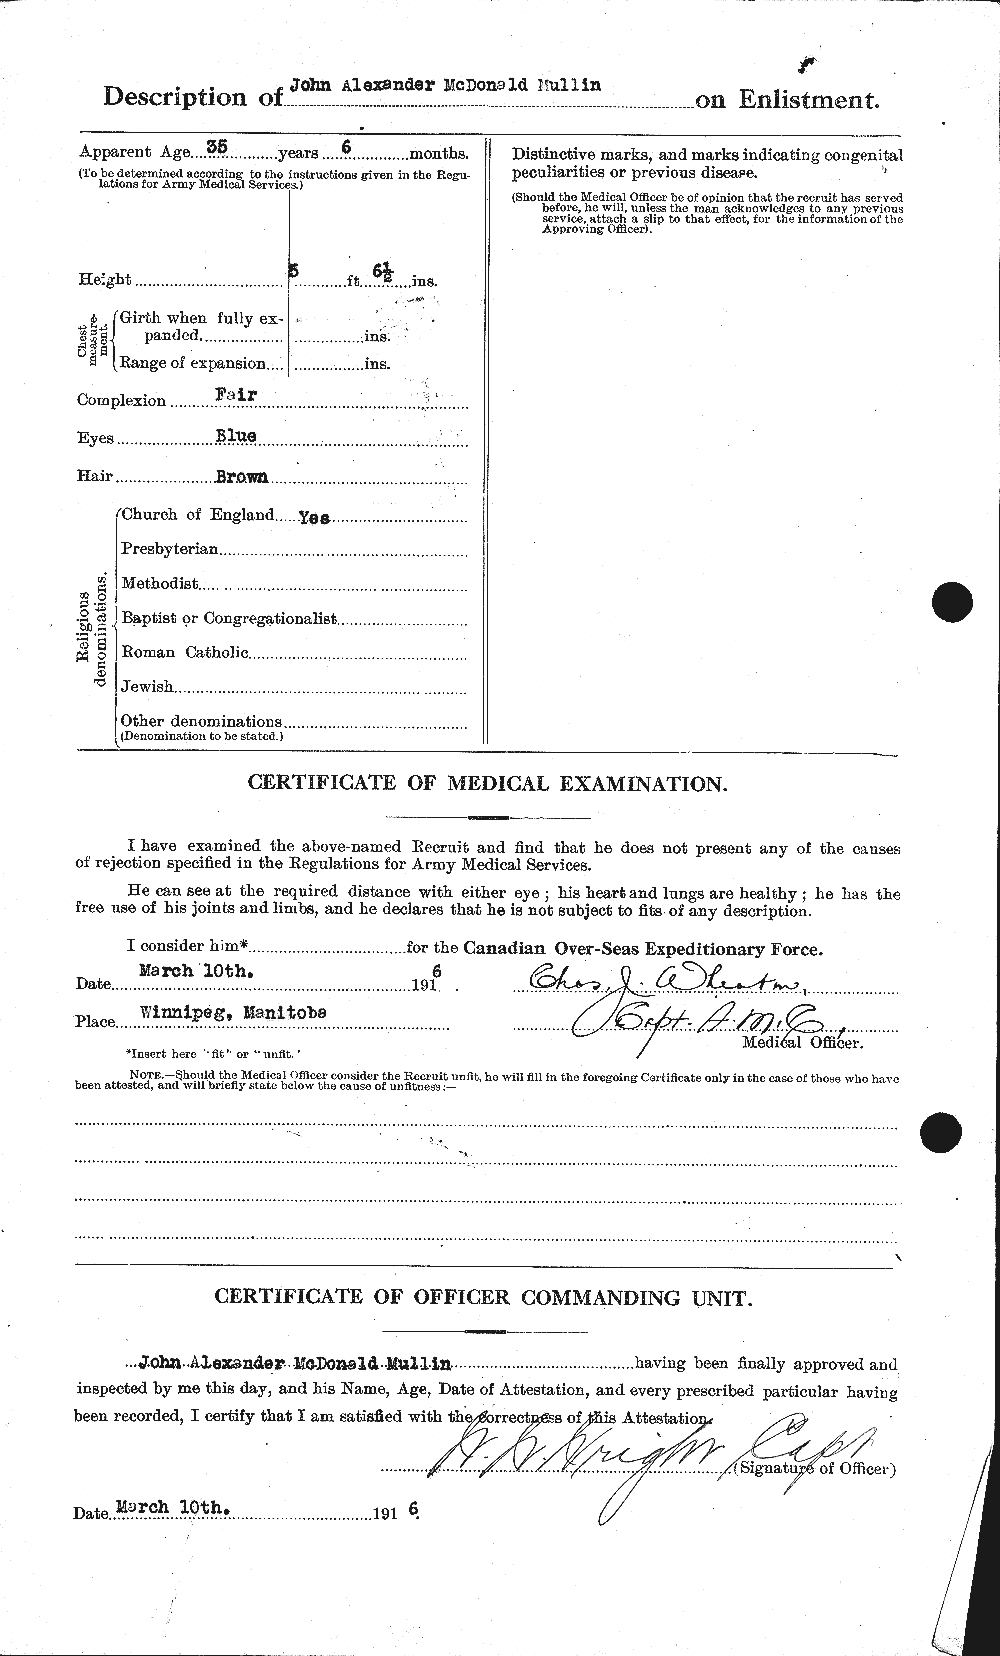 Personnel Records of the First World War - CEF 513431b